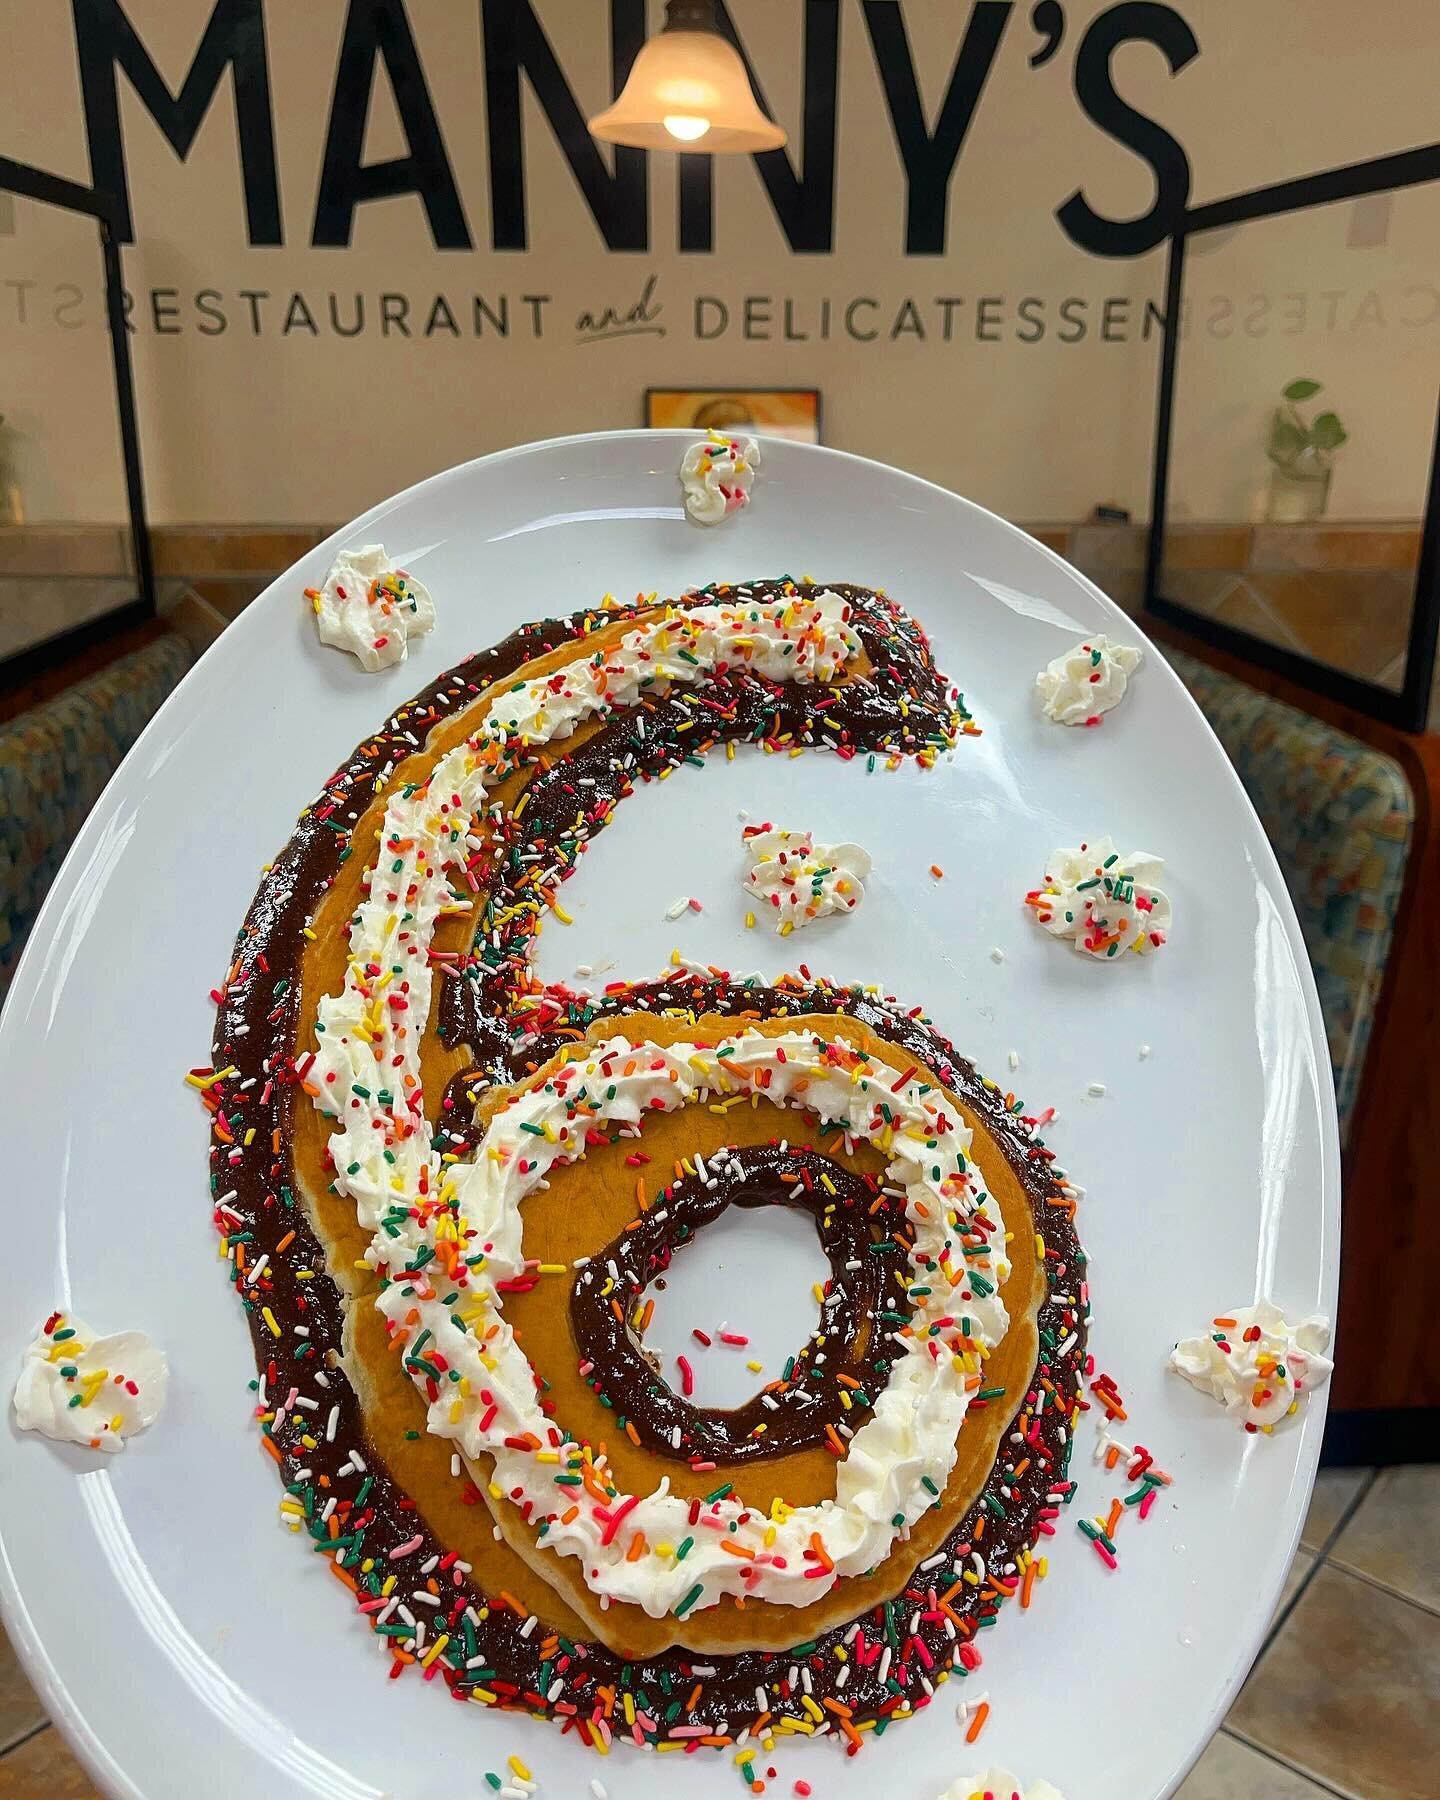 Wow! SIX WHOLE YEARS OF MANNY&rsquo;S! We couldn&rsquo;t have done it without you! To celebrate we&rsquo;re giving away a FREE CATERING TRAY! Tag 6 friends for a chance to win a catering order for 6! Winner will be announced Friday. #NoOtherDeli